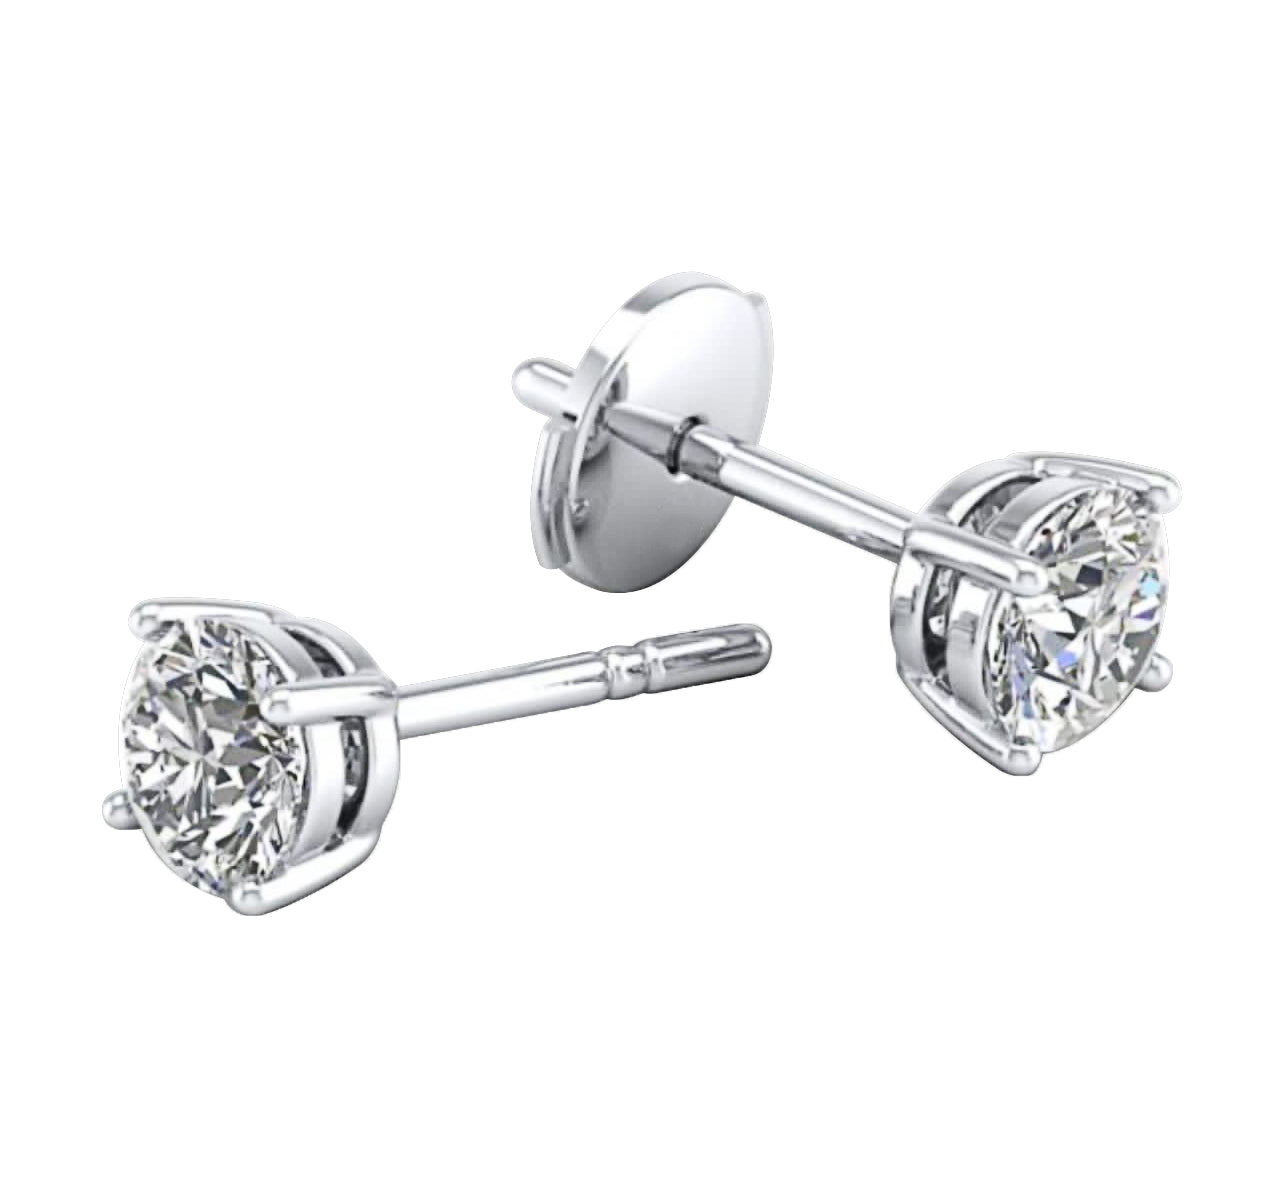 Timeless Glamour: Adorn Yourself with 5 Carat Round Diamond Earrings